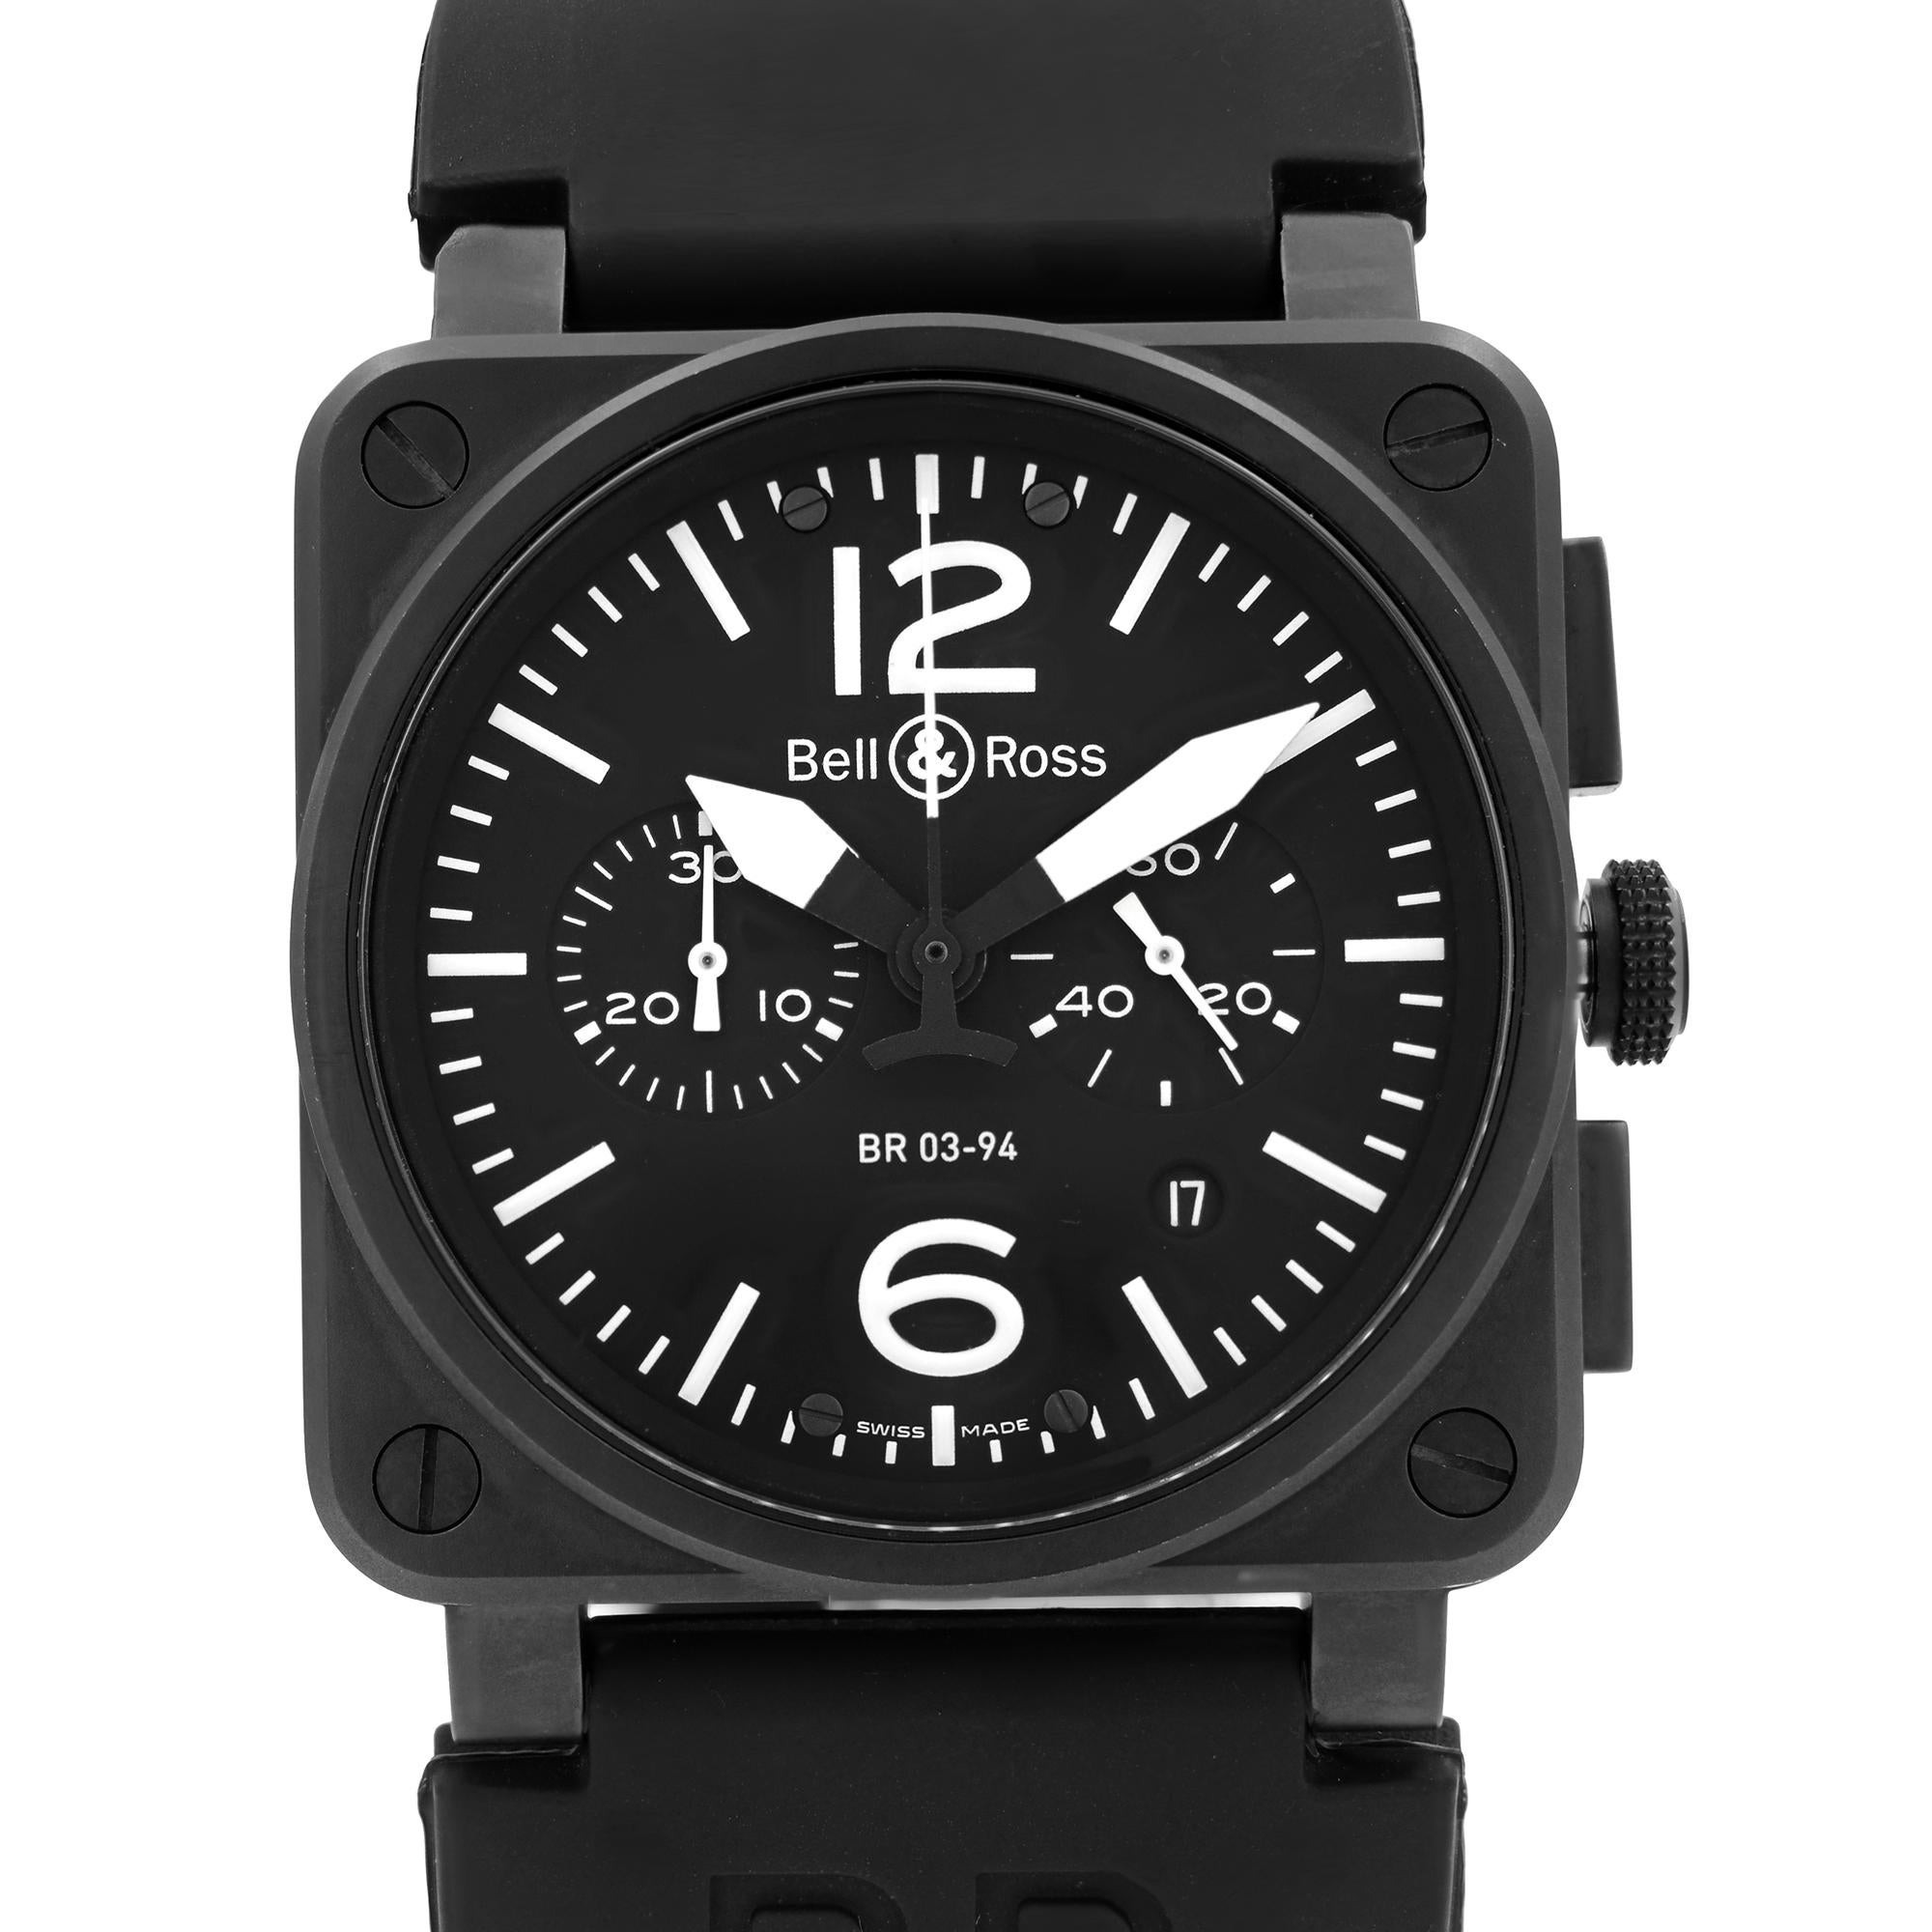 Pre-Owned Bell & Ross Aviation Steel Chronograph Black Dial Rubber Band Men's Watch BR03-94. Minor Blemishes on PVD Coating.  Some scratches on top lugs as in pictures. This Beautiful Timepiece Features: Black PVD Stainless Steel Case with a Black